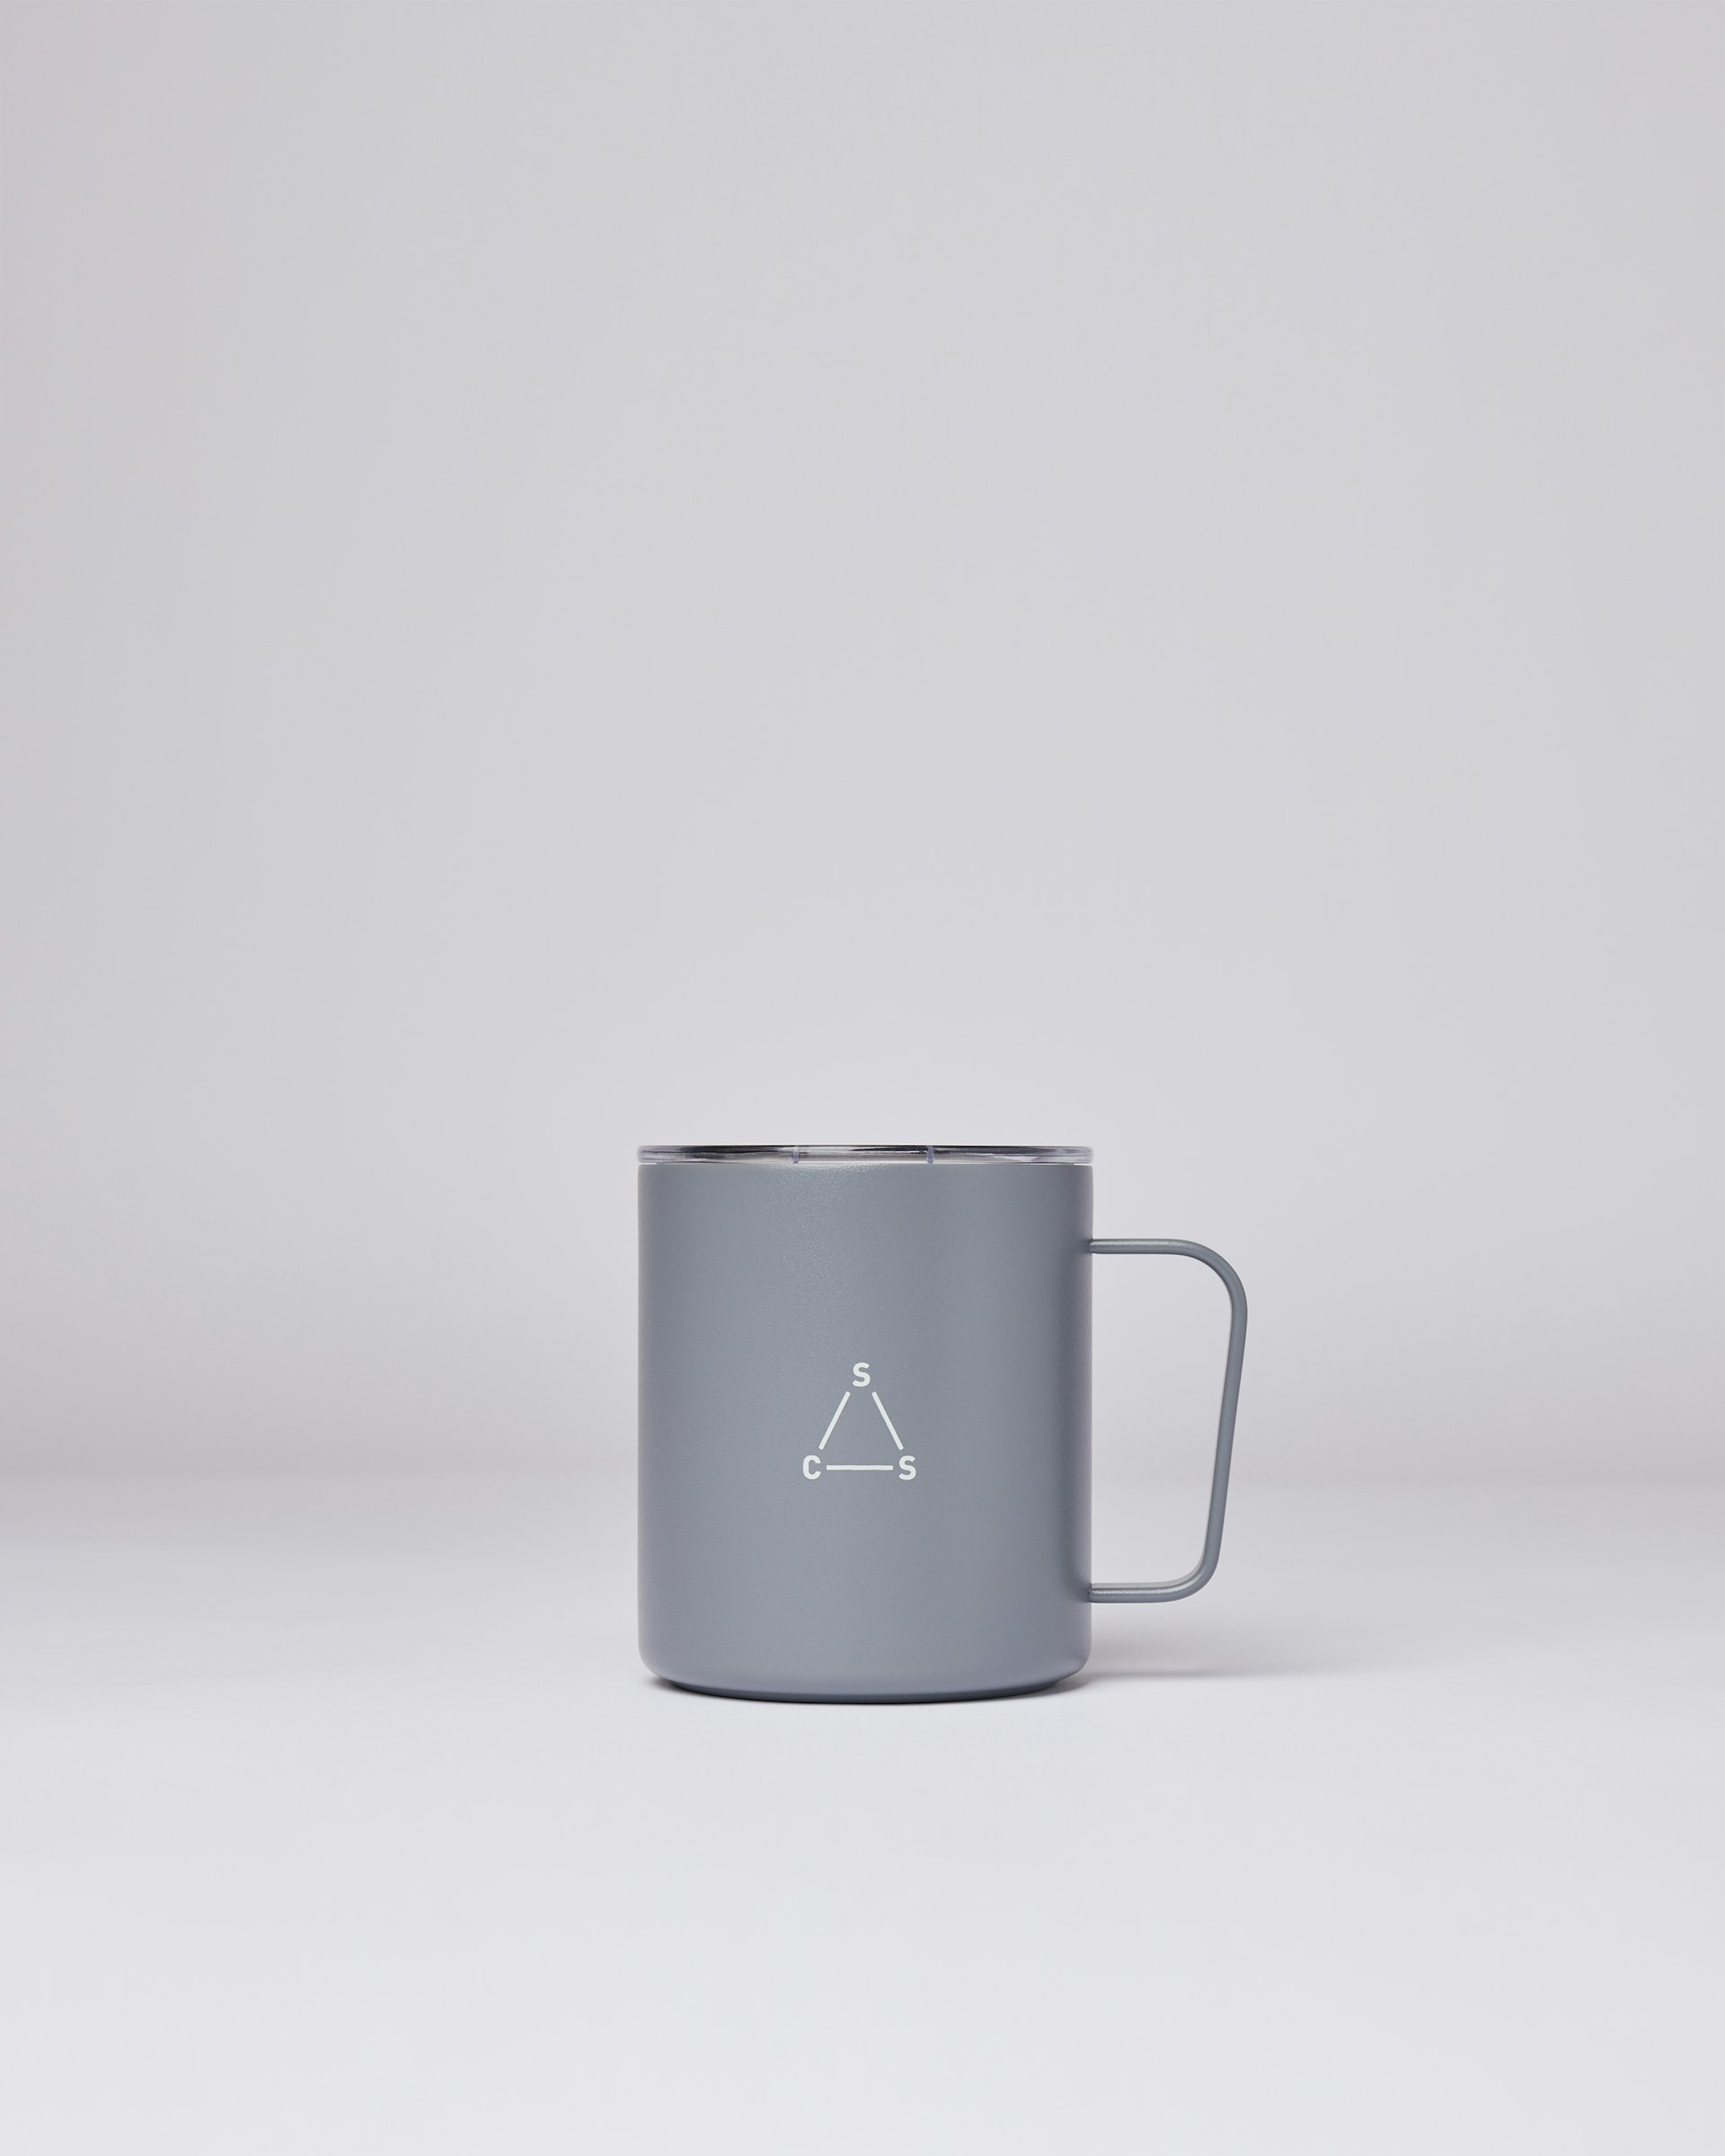 Camp Cup belongs to the category Items and is in color grey